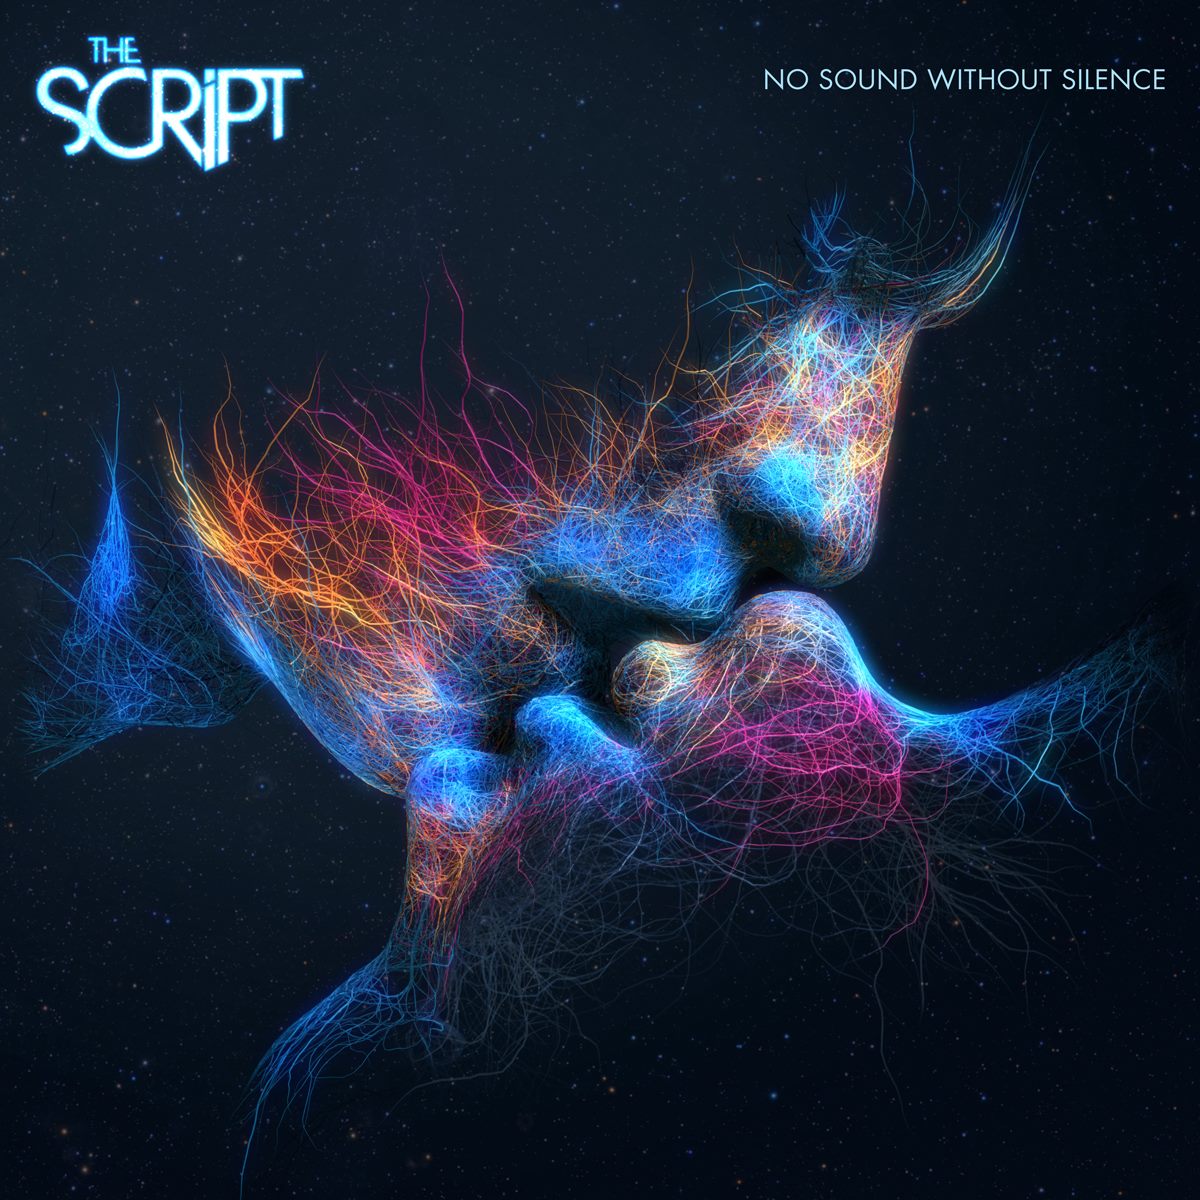 No sound without silence_The script